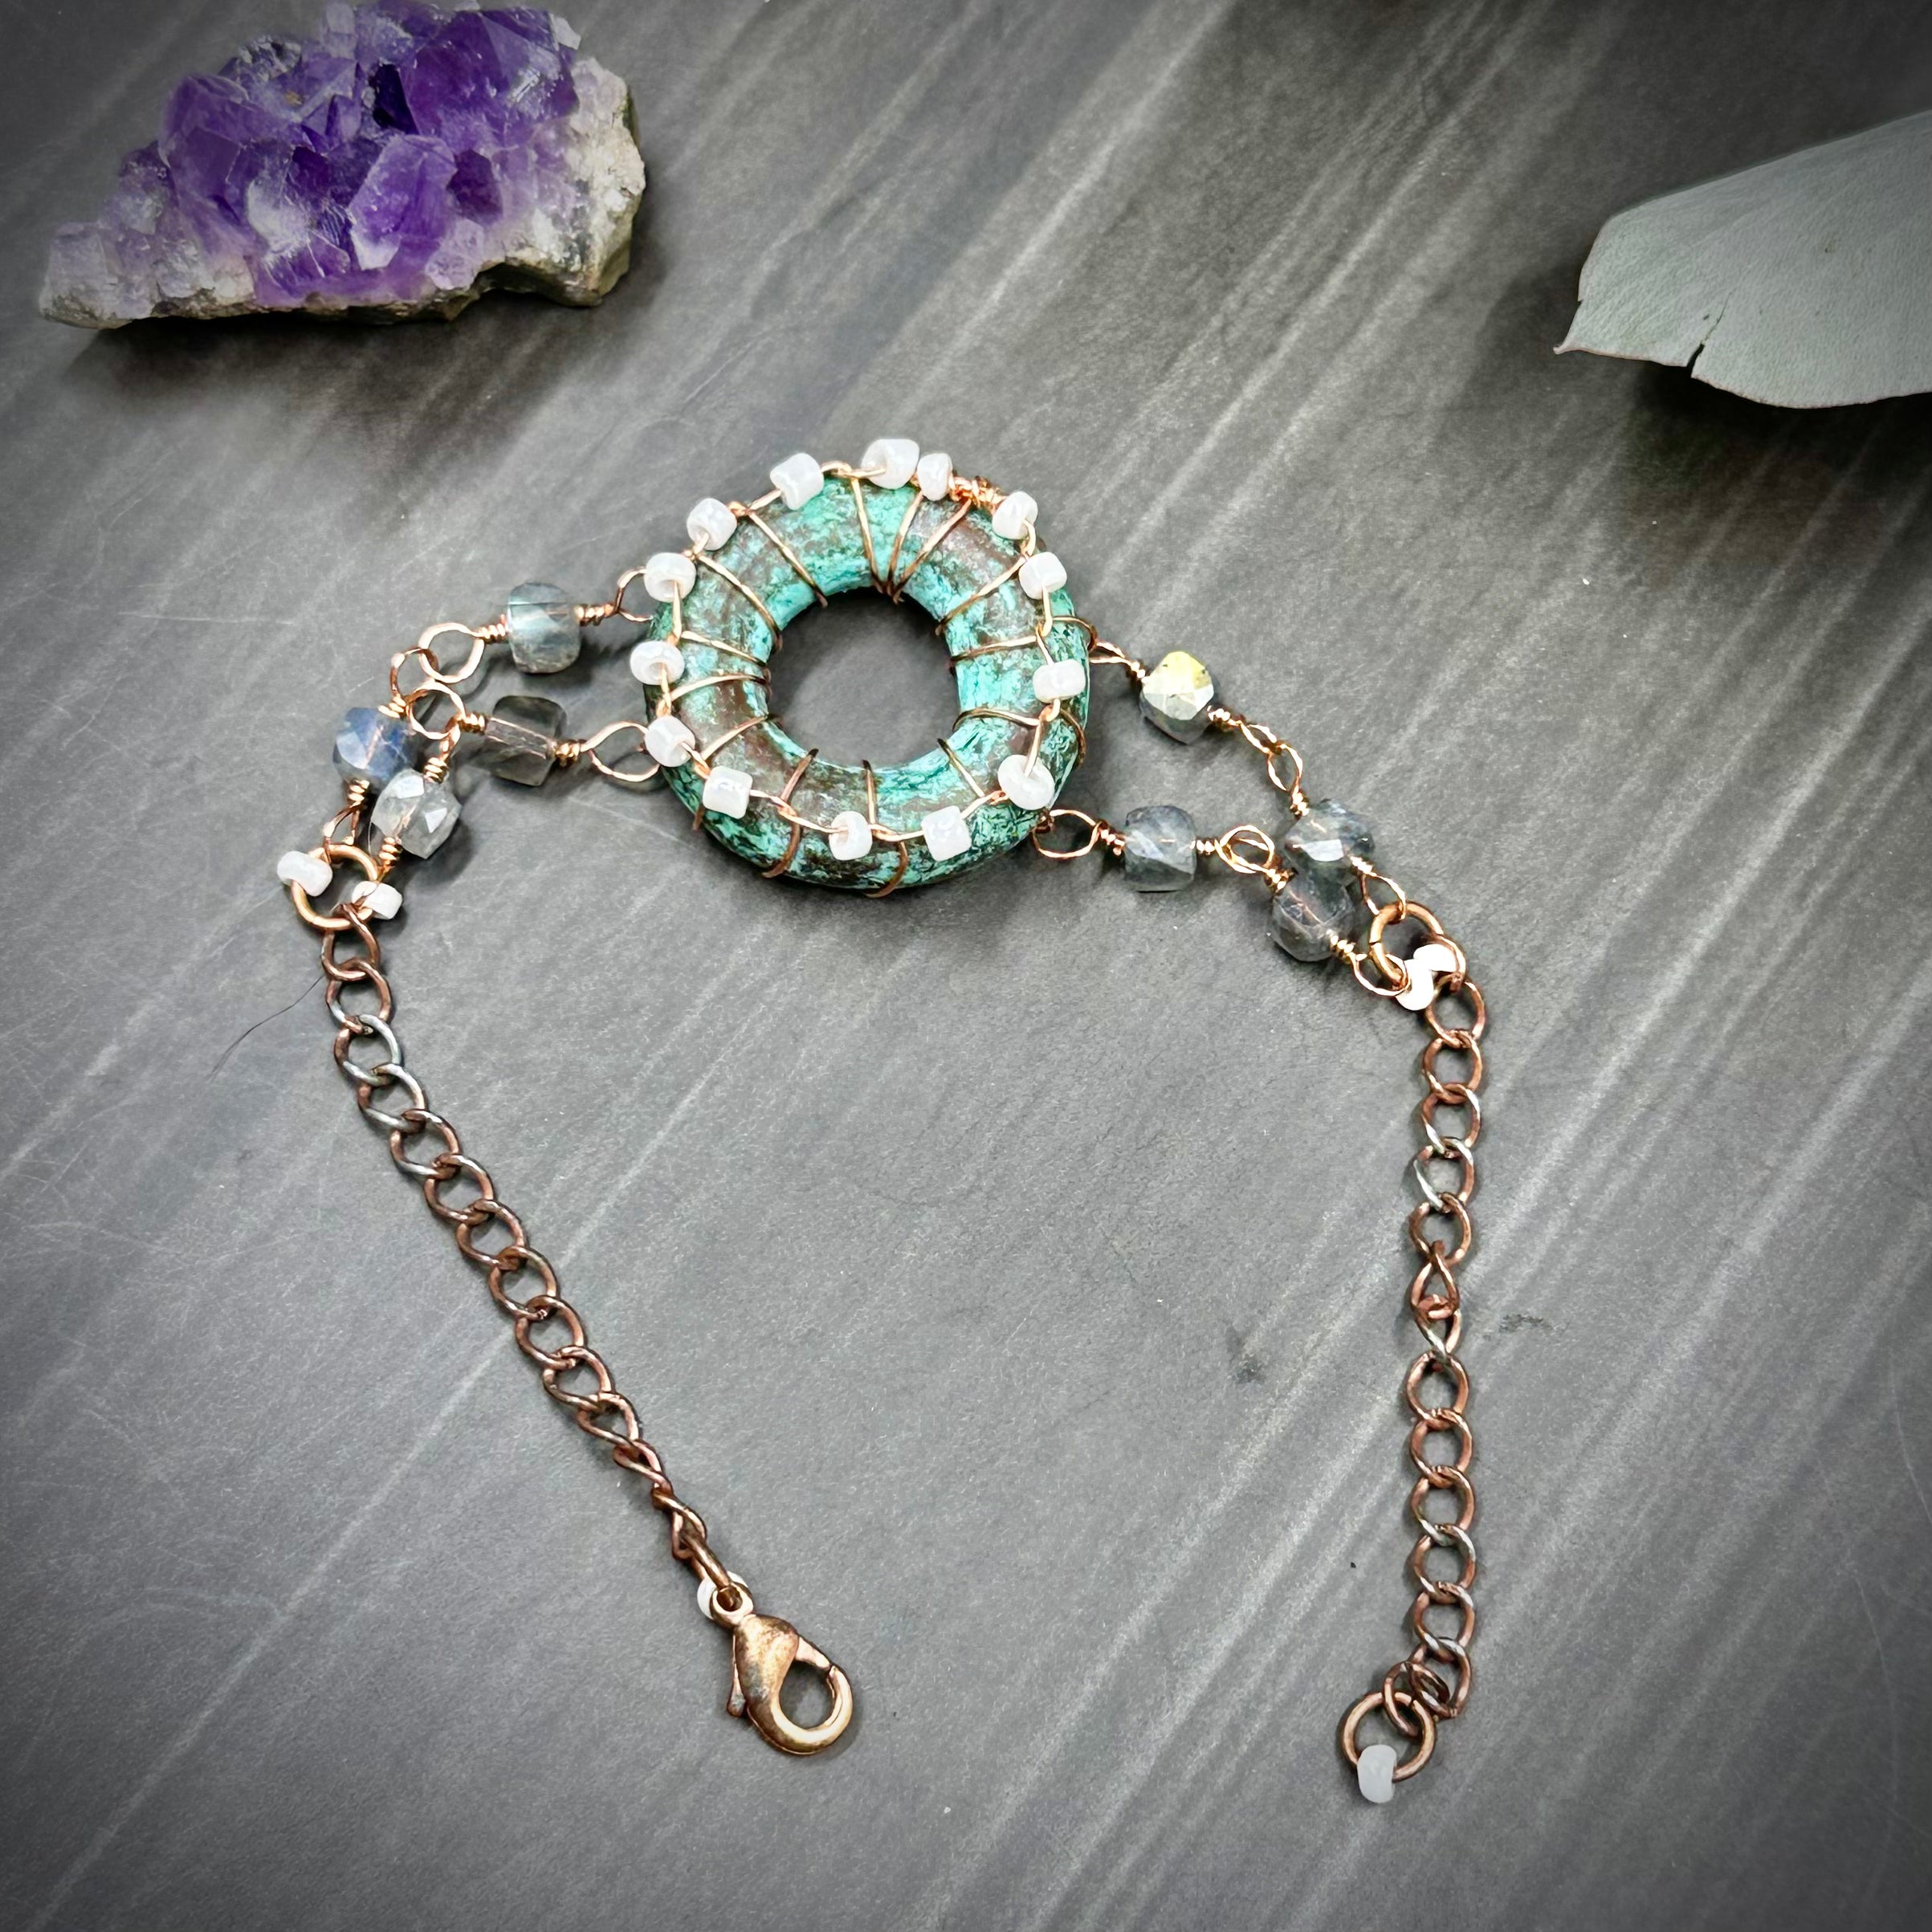 6.5" Copper, Labradorite, and Seed Bead Bracelet